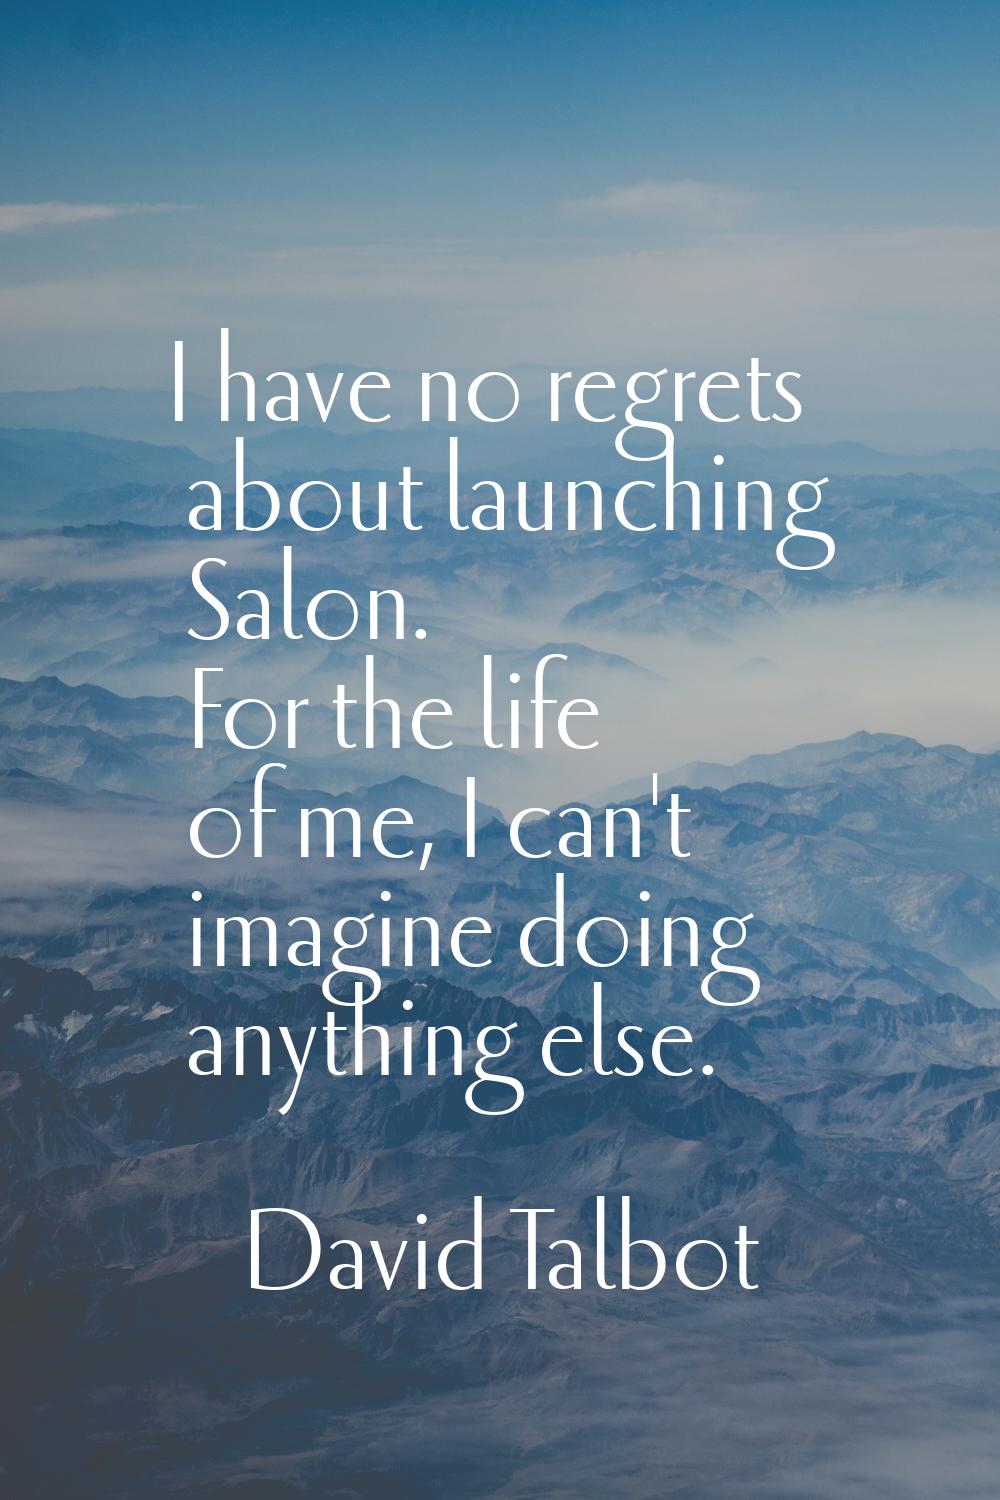 I have no regrets about launching Salon. For the life of me, I can't imagine doing anything else.